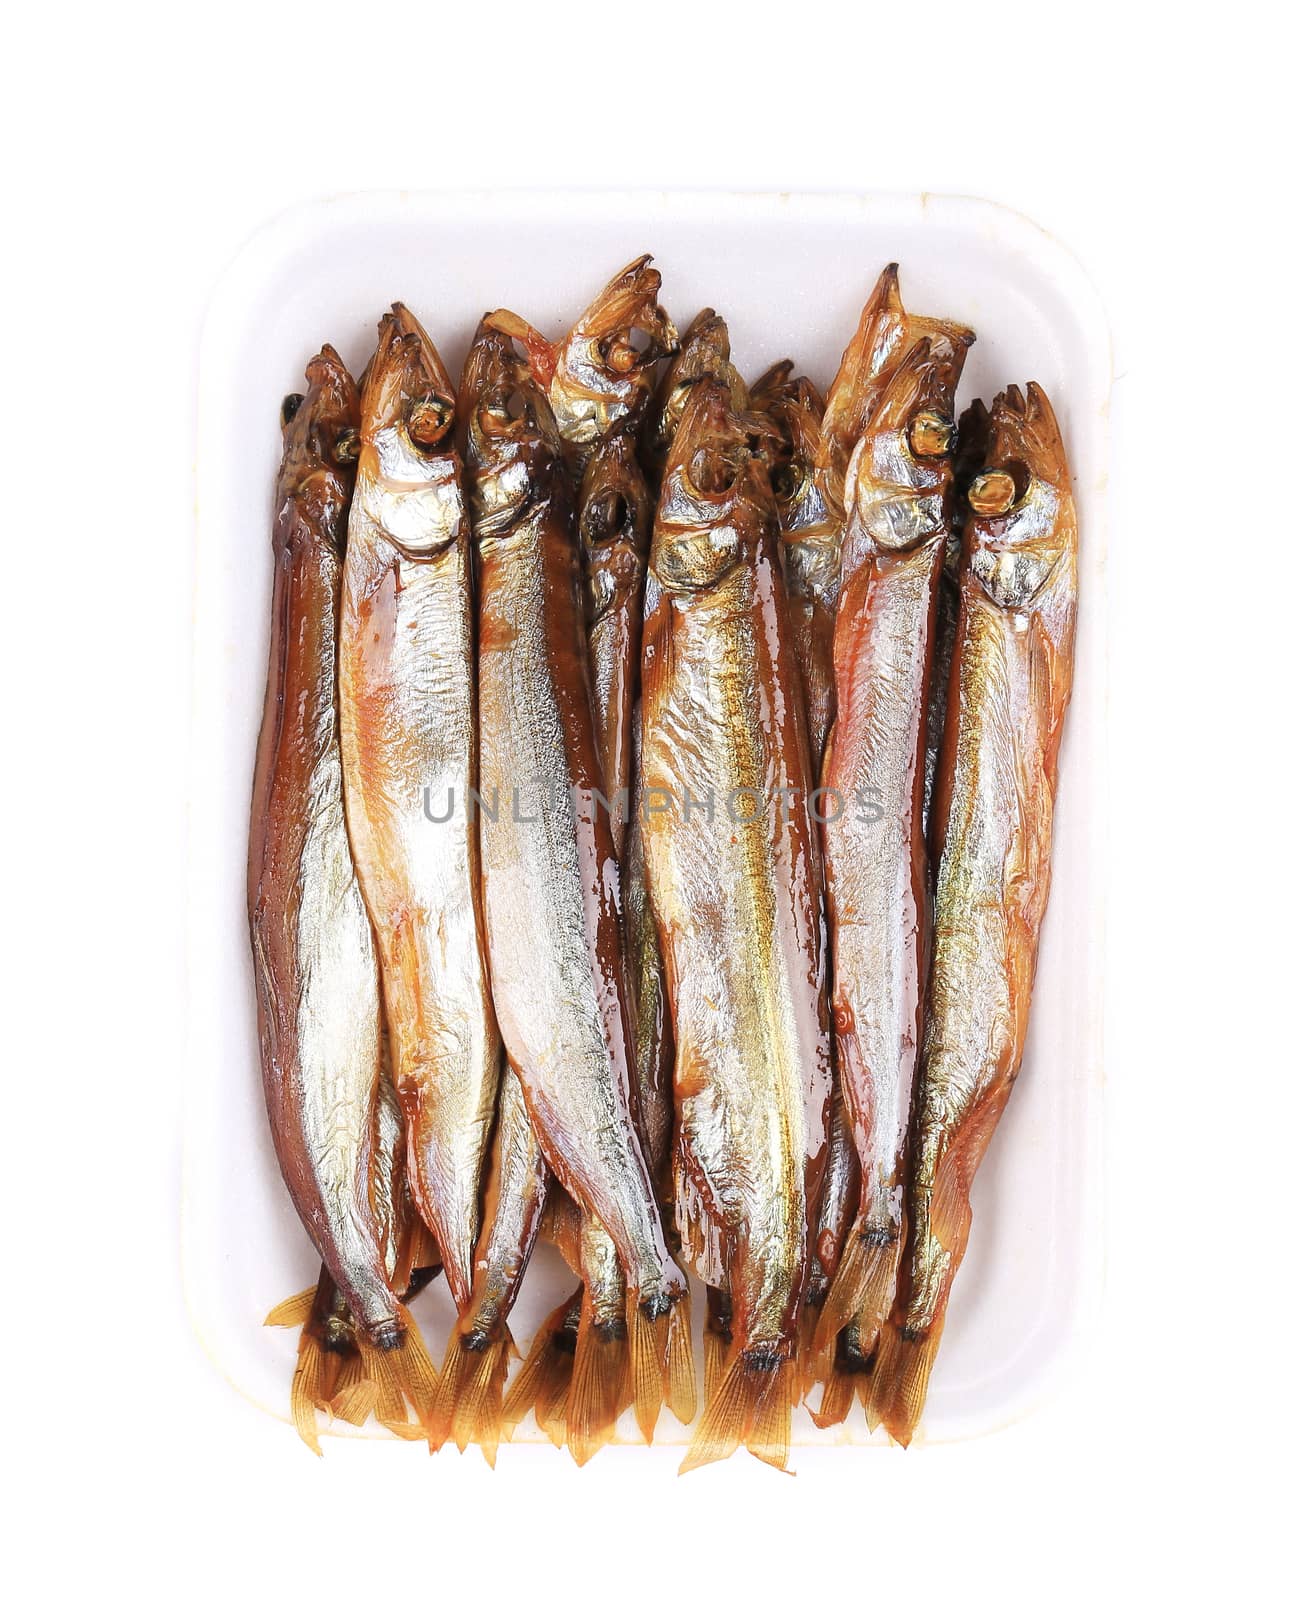 Smoked fish. Isolated on a white background.